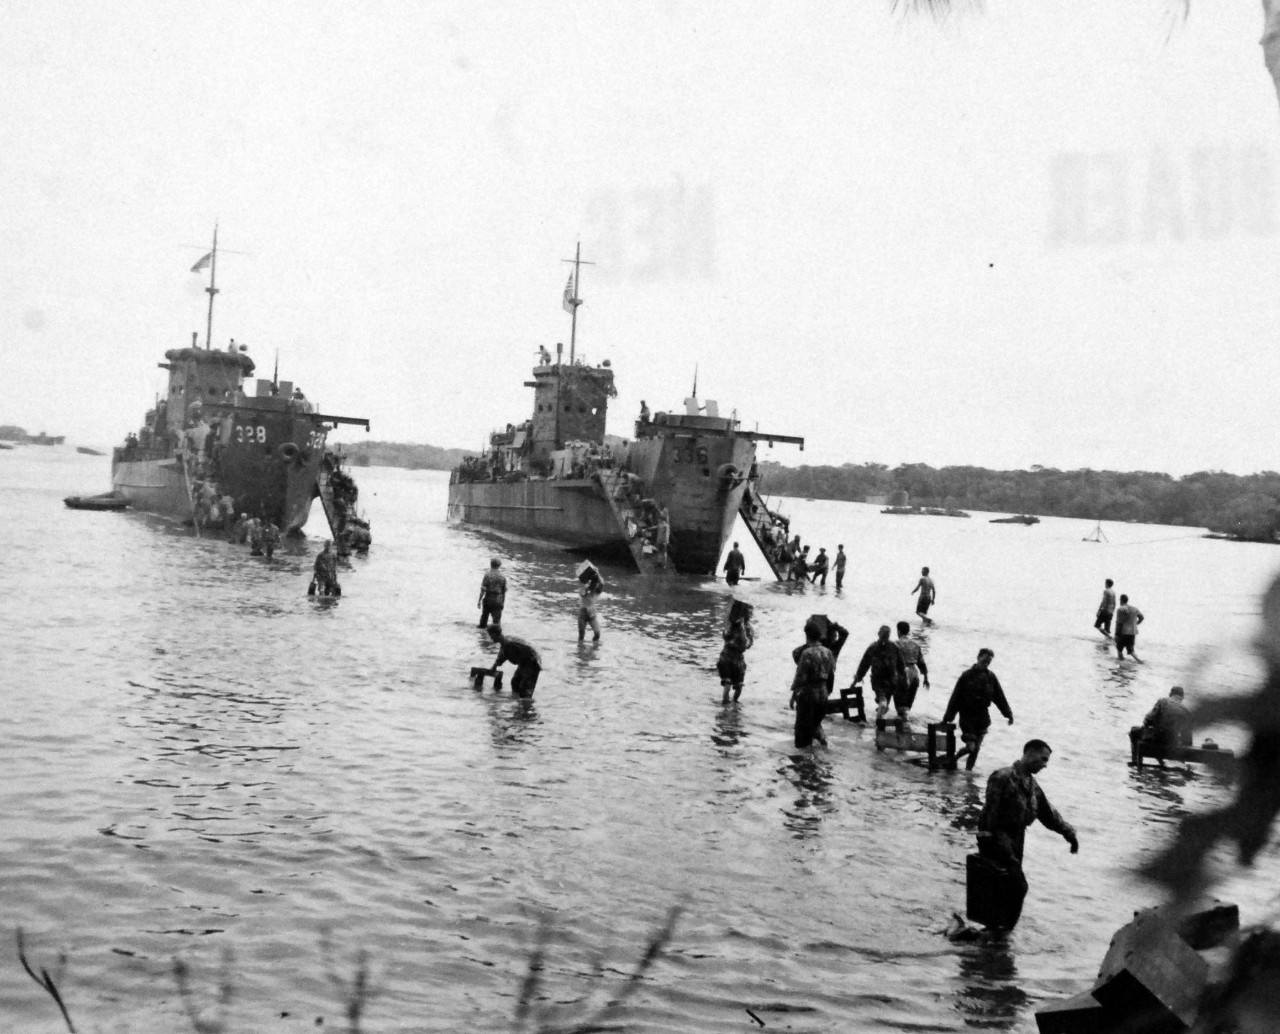 80-G-52629:  Rendova Island Invasion, June 30, 1943.   Troops during the invasion, transporting items from Landing Craft Infantry (Large),  LCI(L) 328 and LCI(L) 336.    Official U.S. Navy Photograph, now in the collections of the National Archives.  (2018/04/04).   